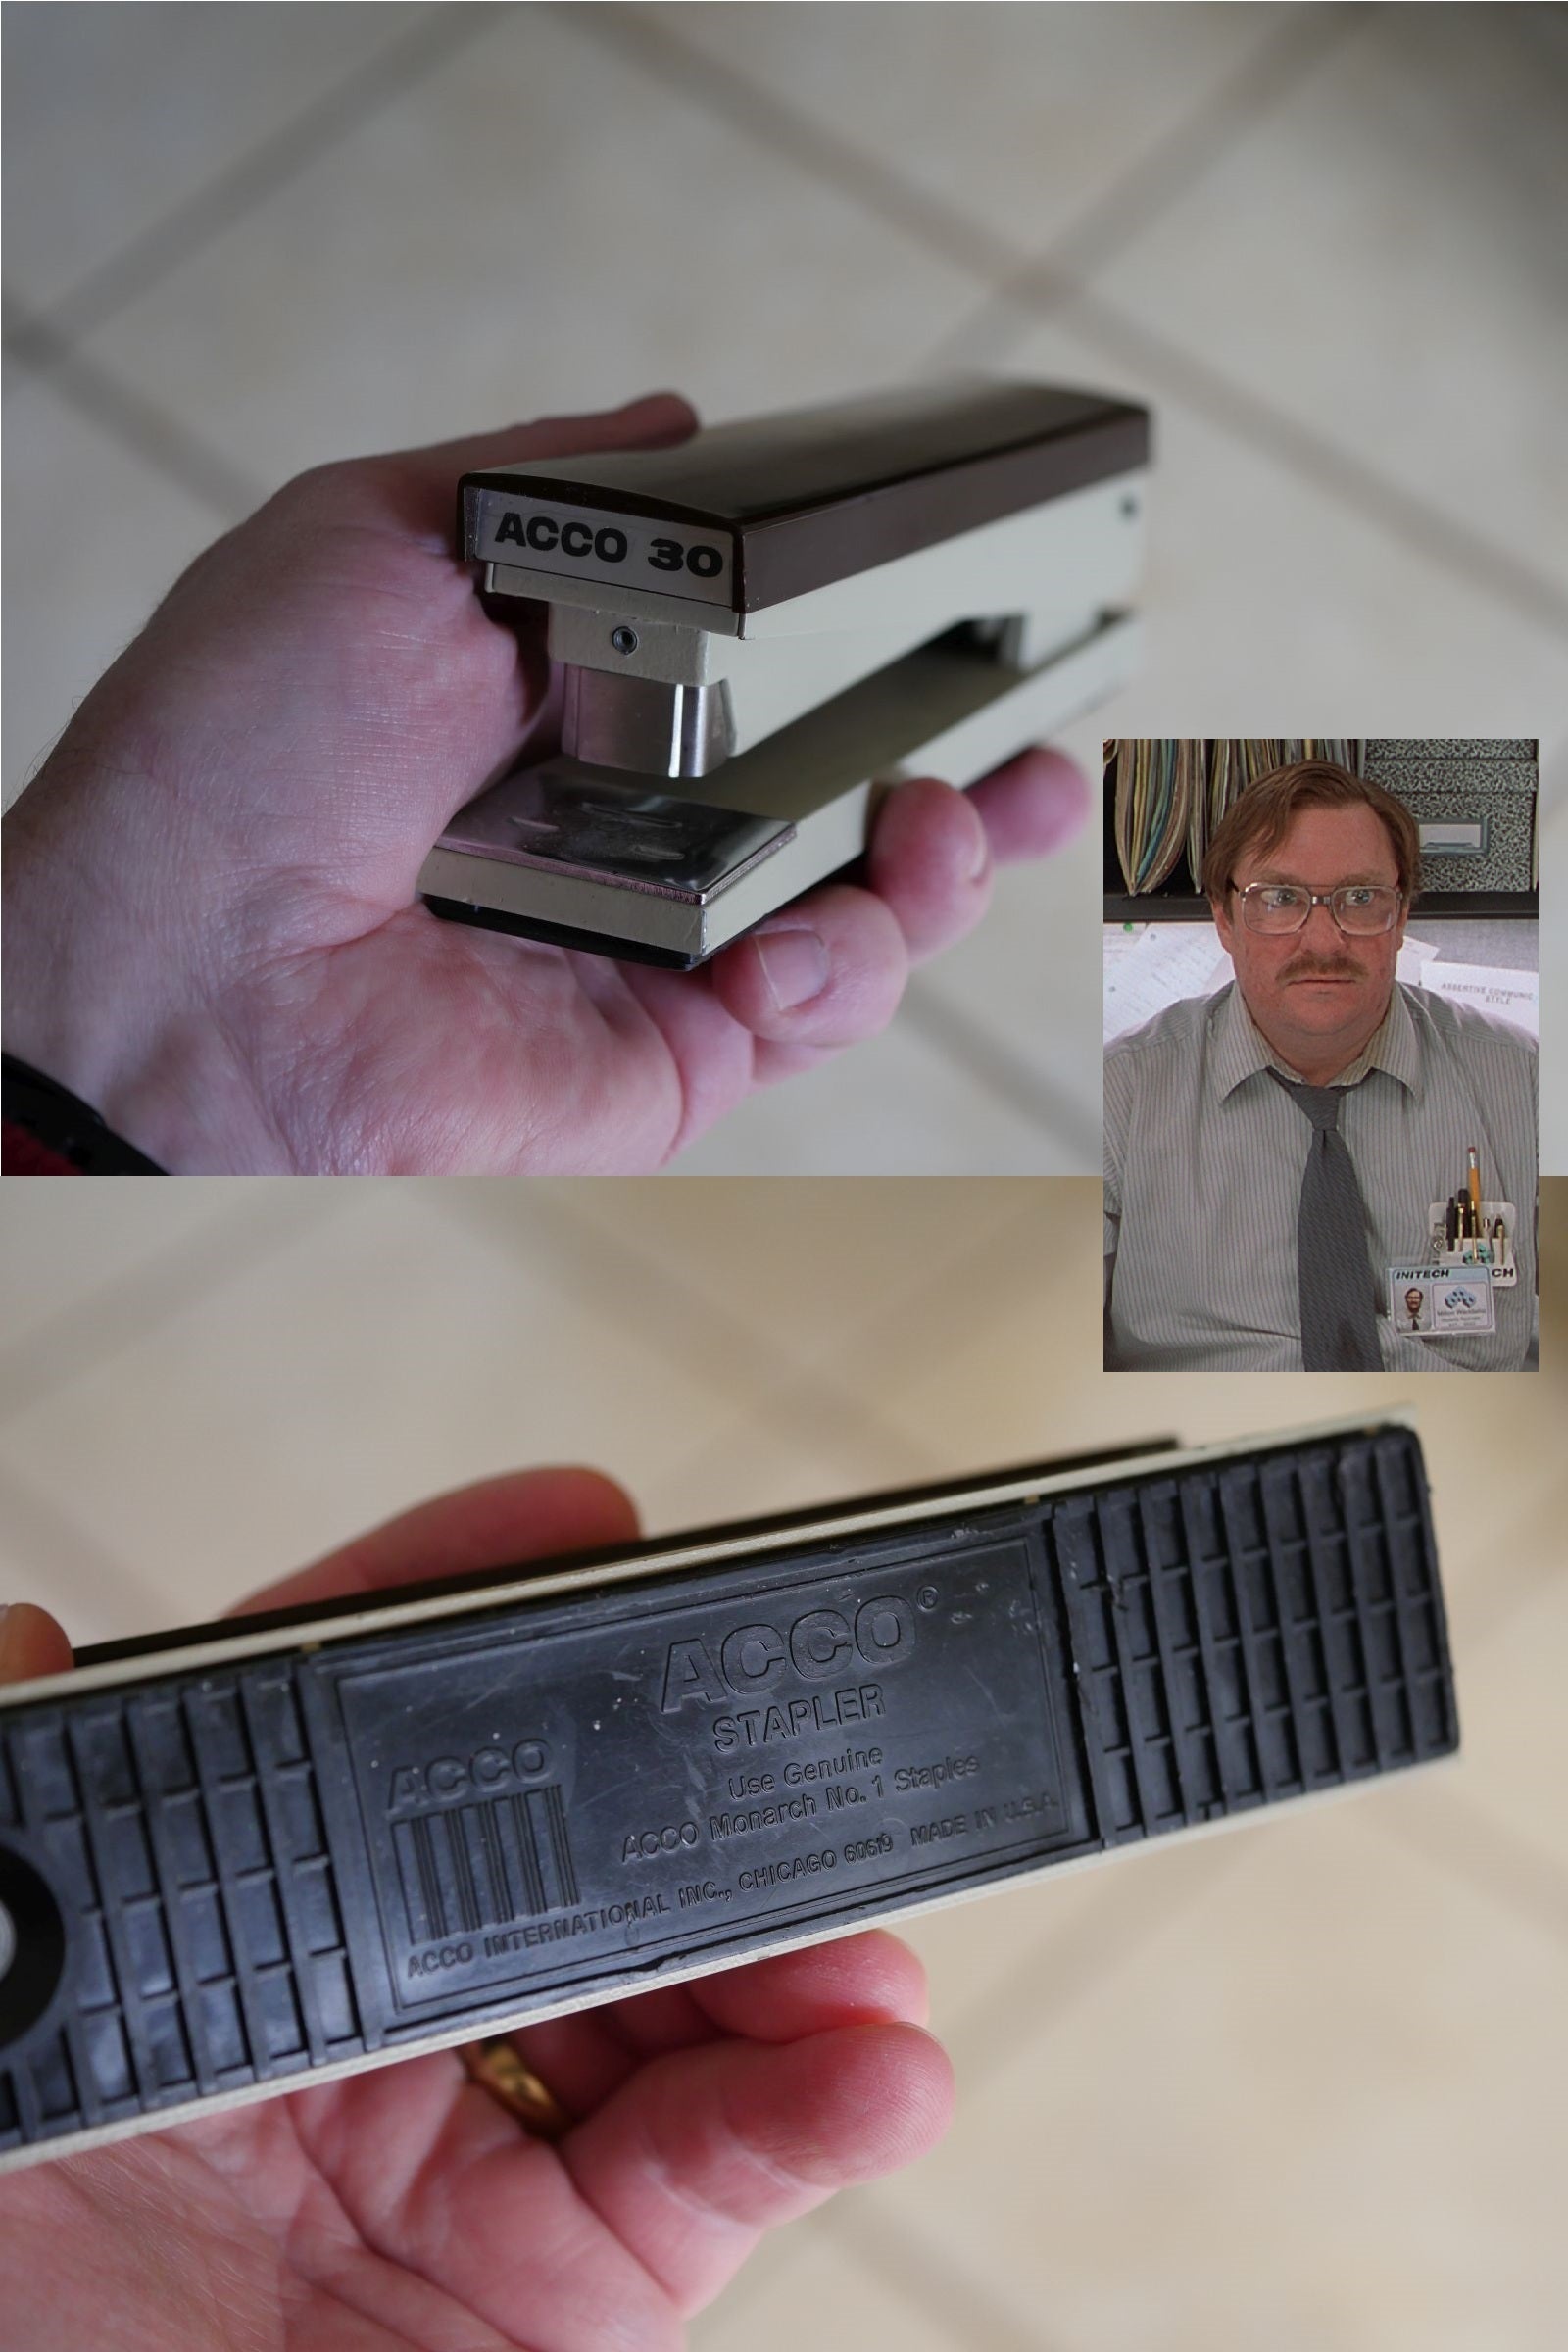 I am by no means like Milton from Office Space, but I have had this Acco 30 stapler for at least 20 years. Made of steel, made in the USA, and shipped around the world until less expensive manufacturing venues became available. Try and find a stapler not made in Asia nowadays. - Apple making iPhones in the United States? Do not hold your breath